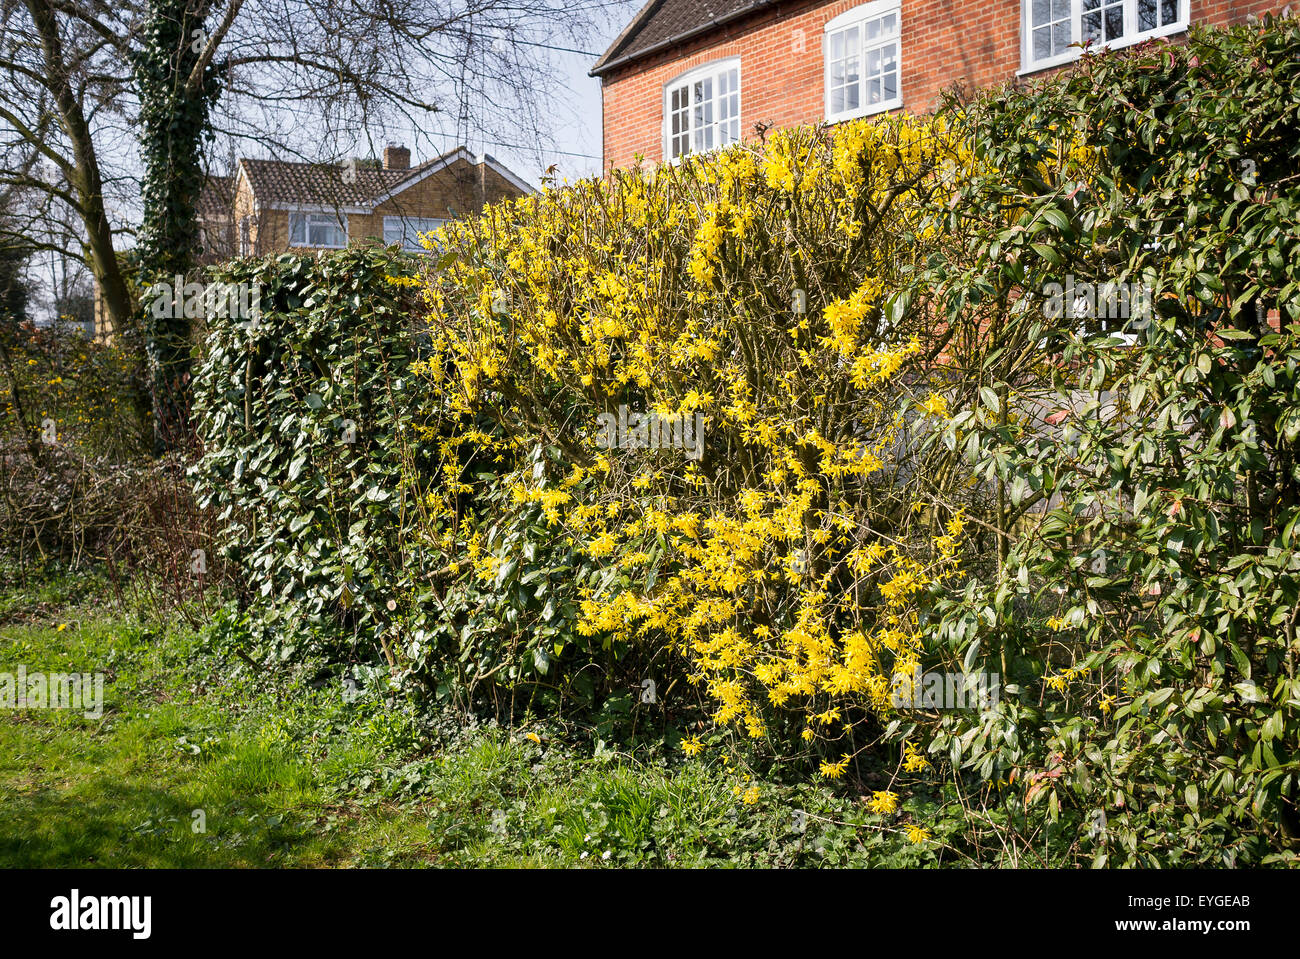 Mixed shrubs and trees form an interesting boundary hedge Stock Photo